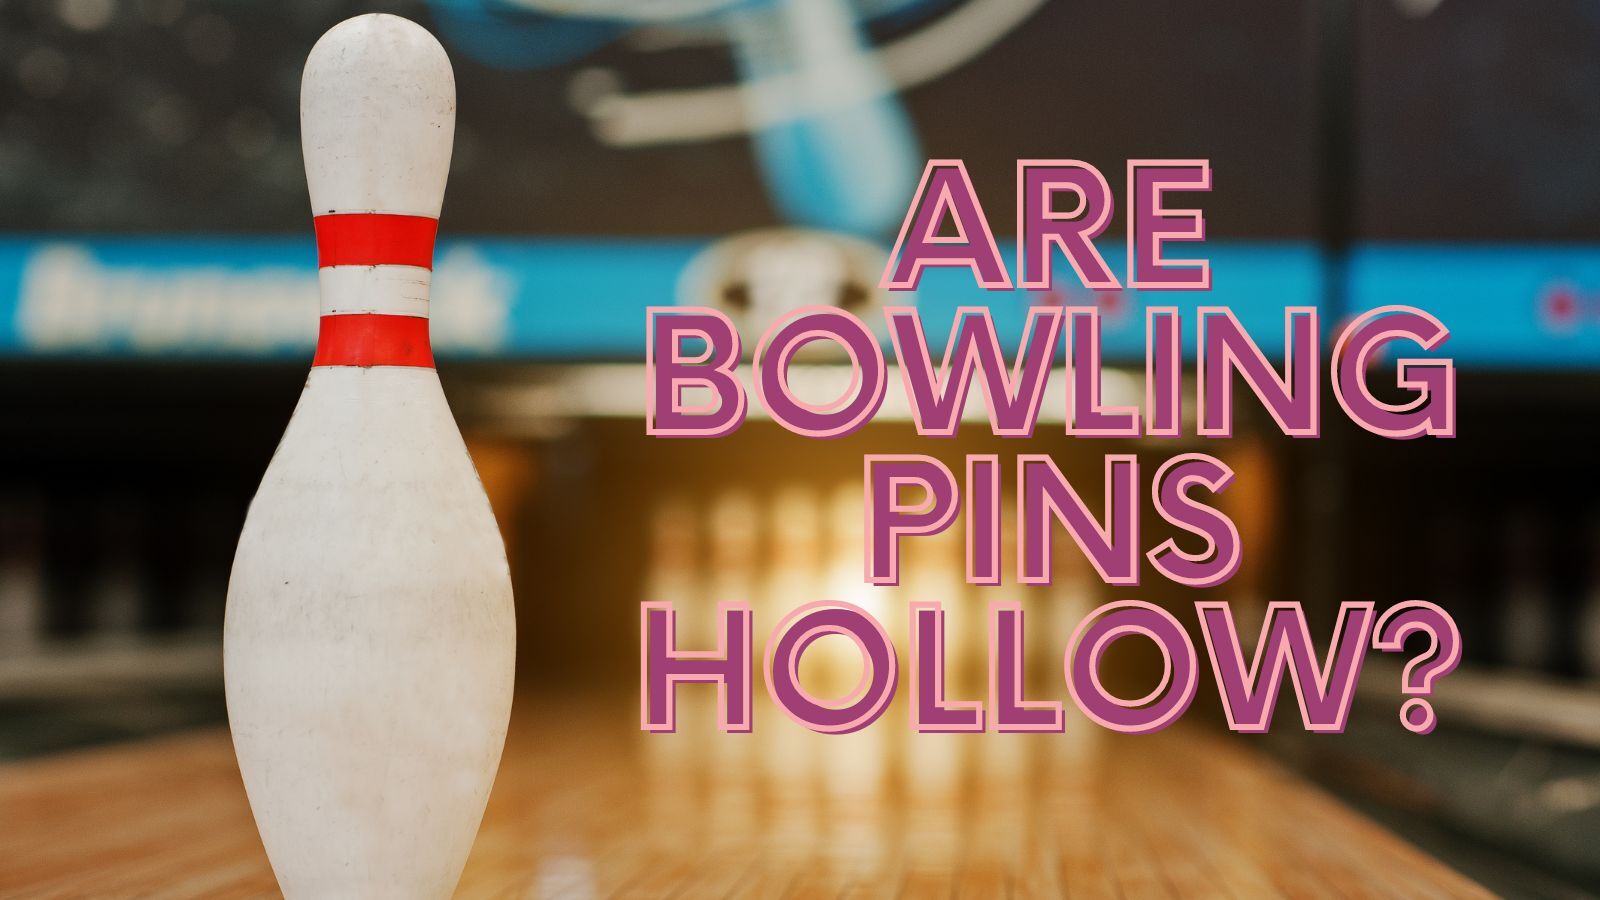 Are Bowling Pins Hollow? [No, Solid]